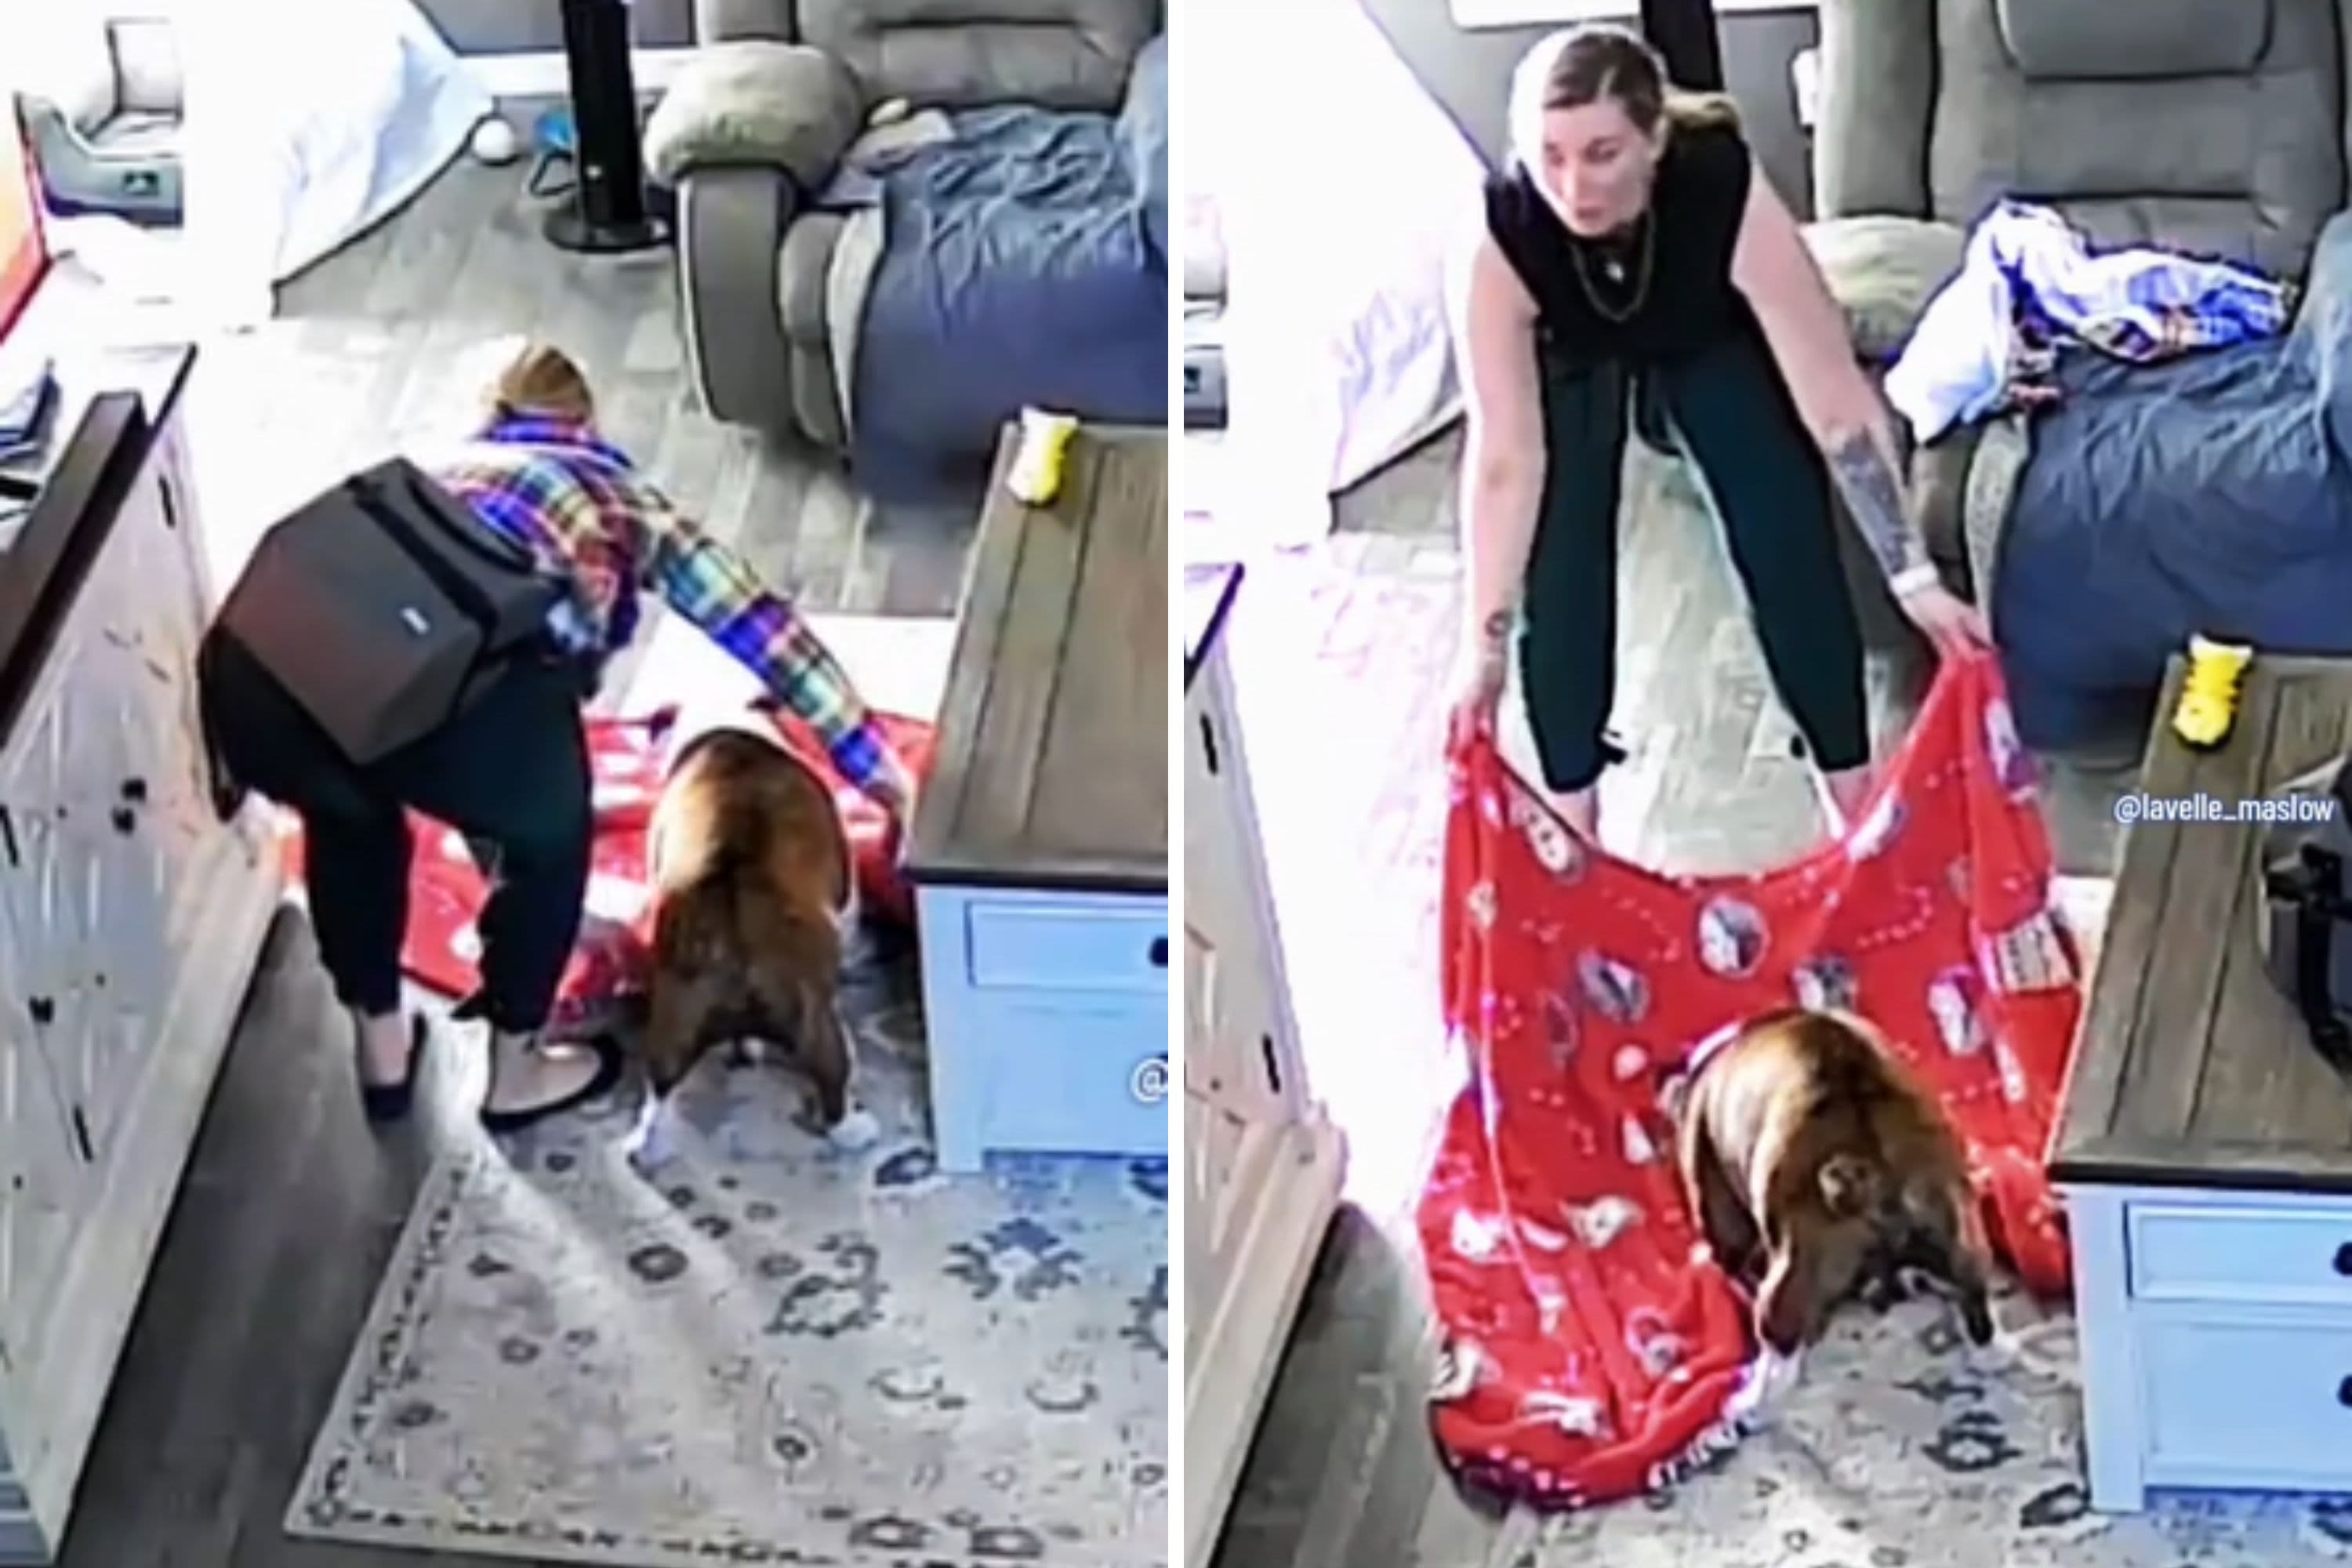 Woman comes home after 12-hour shift, dog greets her in worst way possible